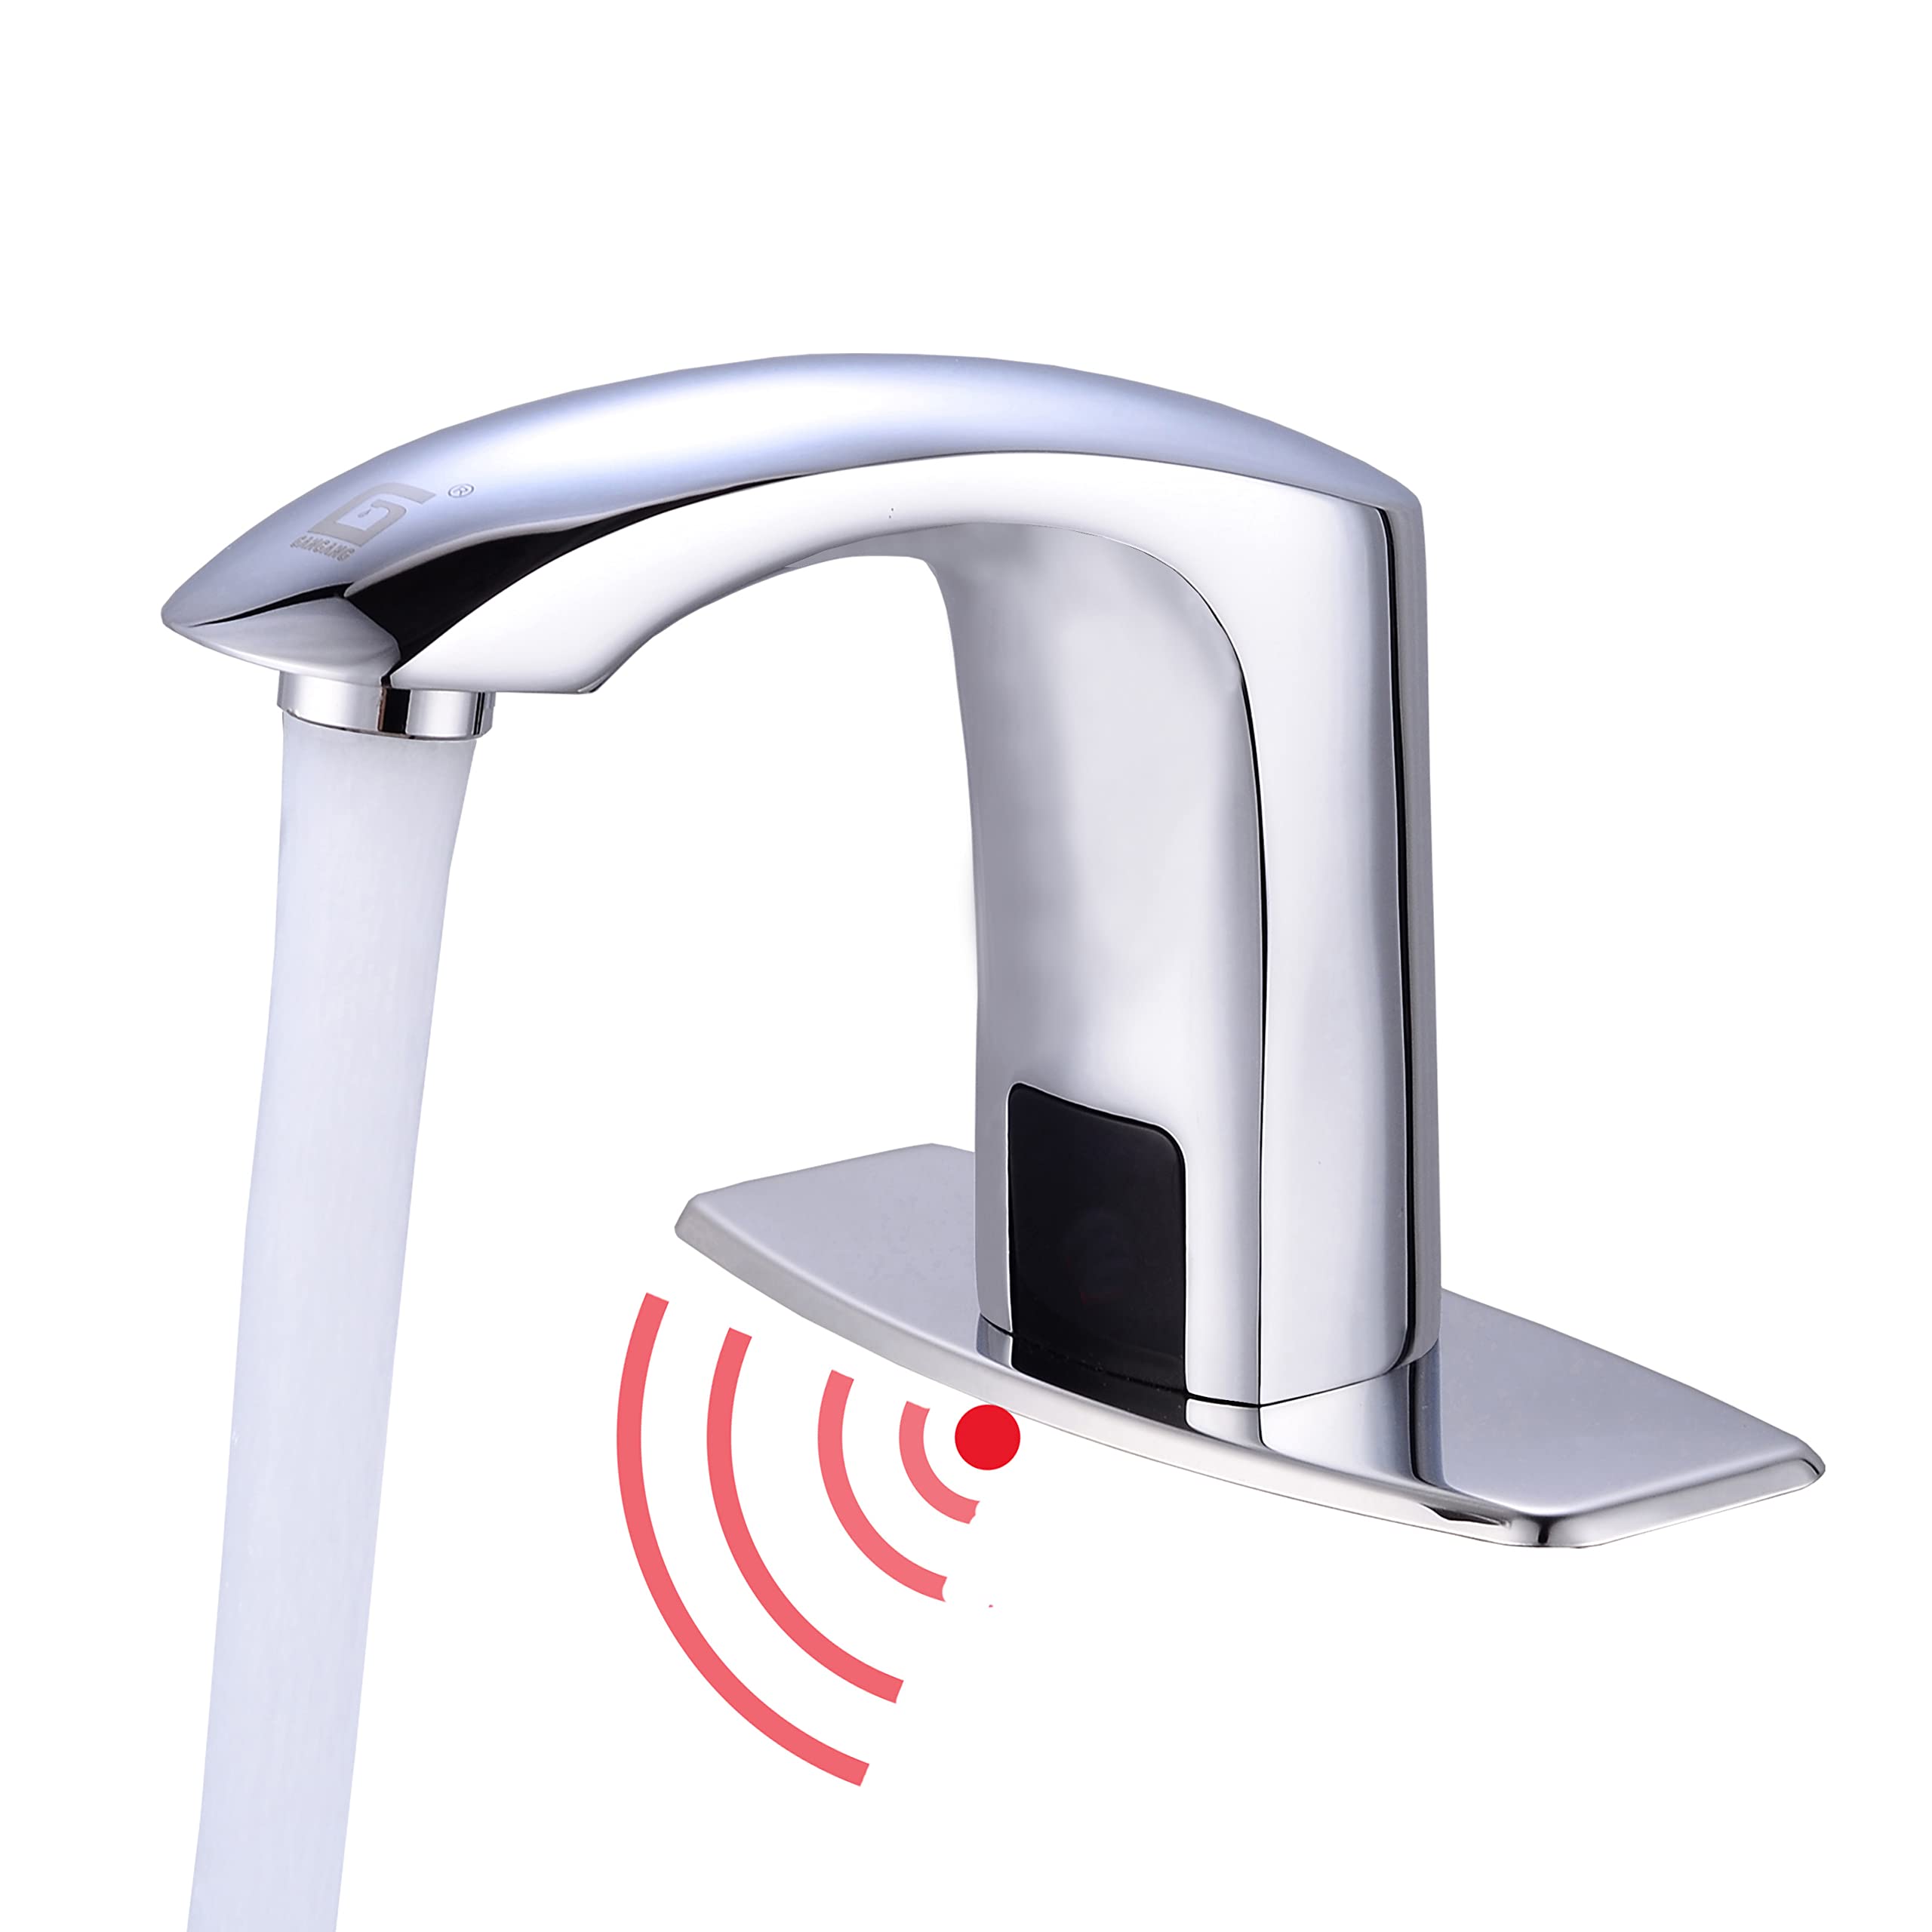 How To Troubleshoot Touchless Faucets - KEGE